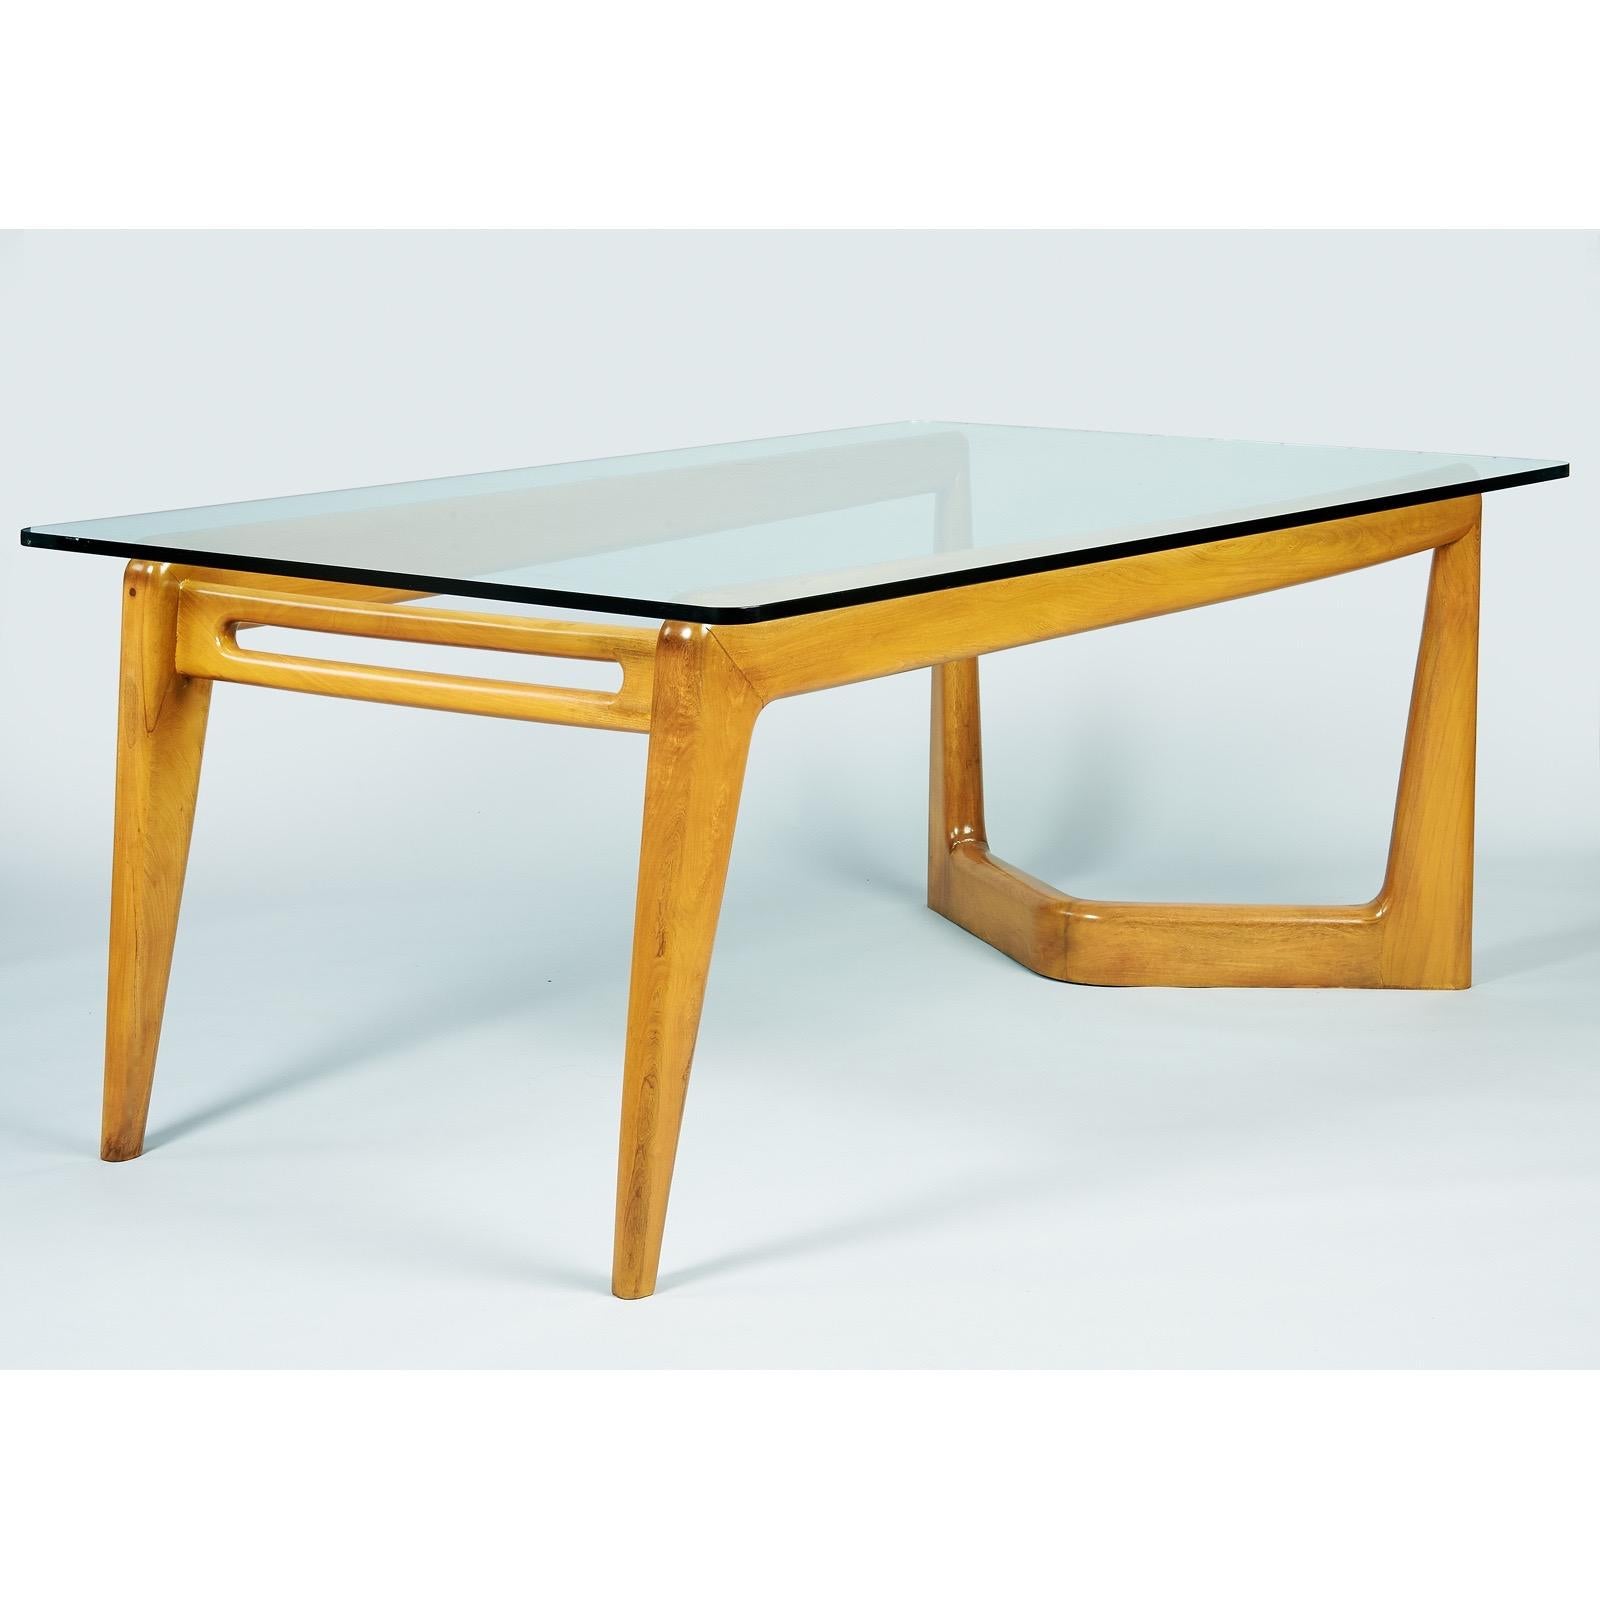 Pierluigi Giordani, (1924 - 2011) 

A monumental biomorphic dining table in polished fruitwood by pioneering Italian midcentury designer Pierluigi Giordani. The imposing sculptural base is daringly asymmetrical: On one end, it tapers into sharply